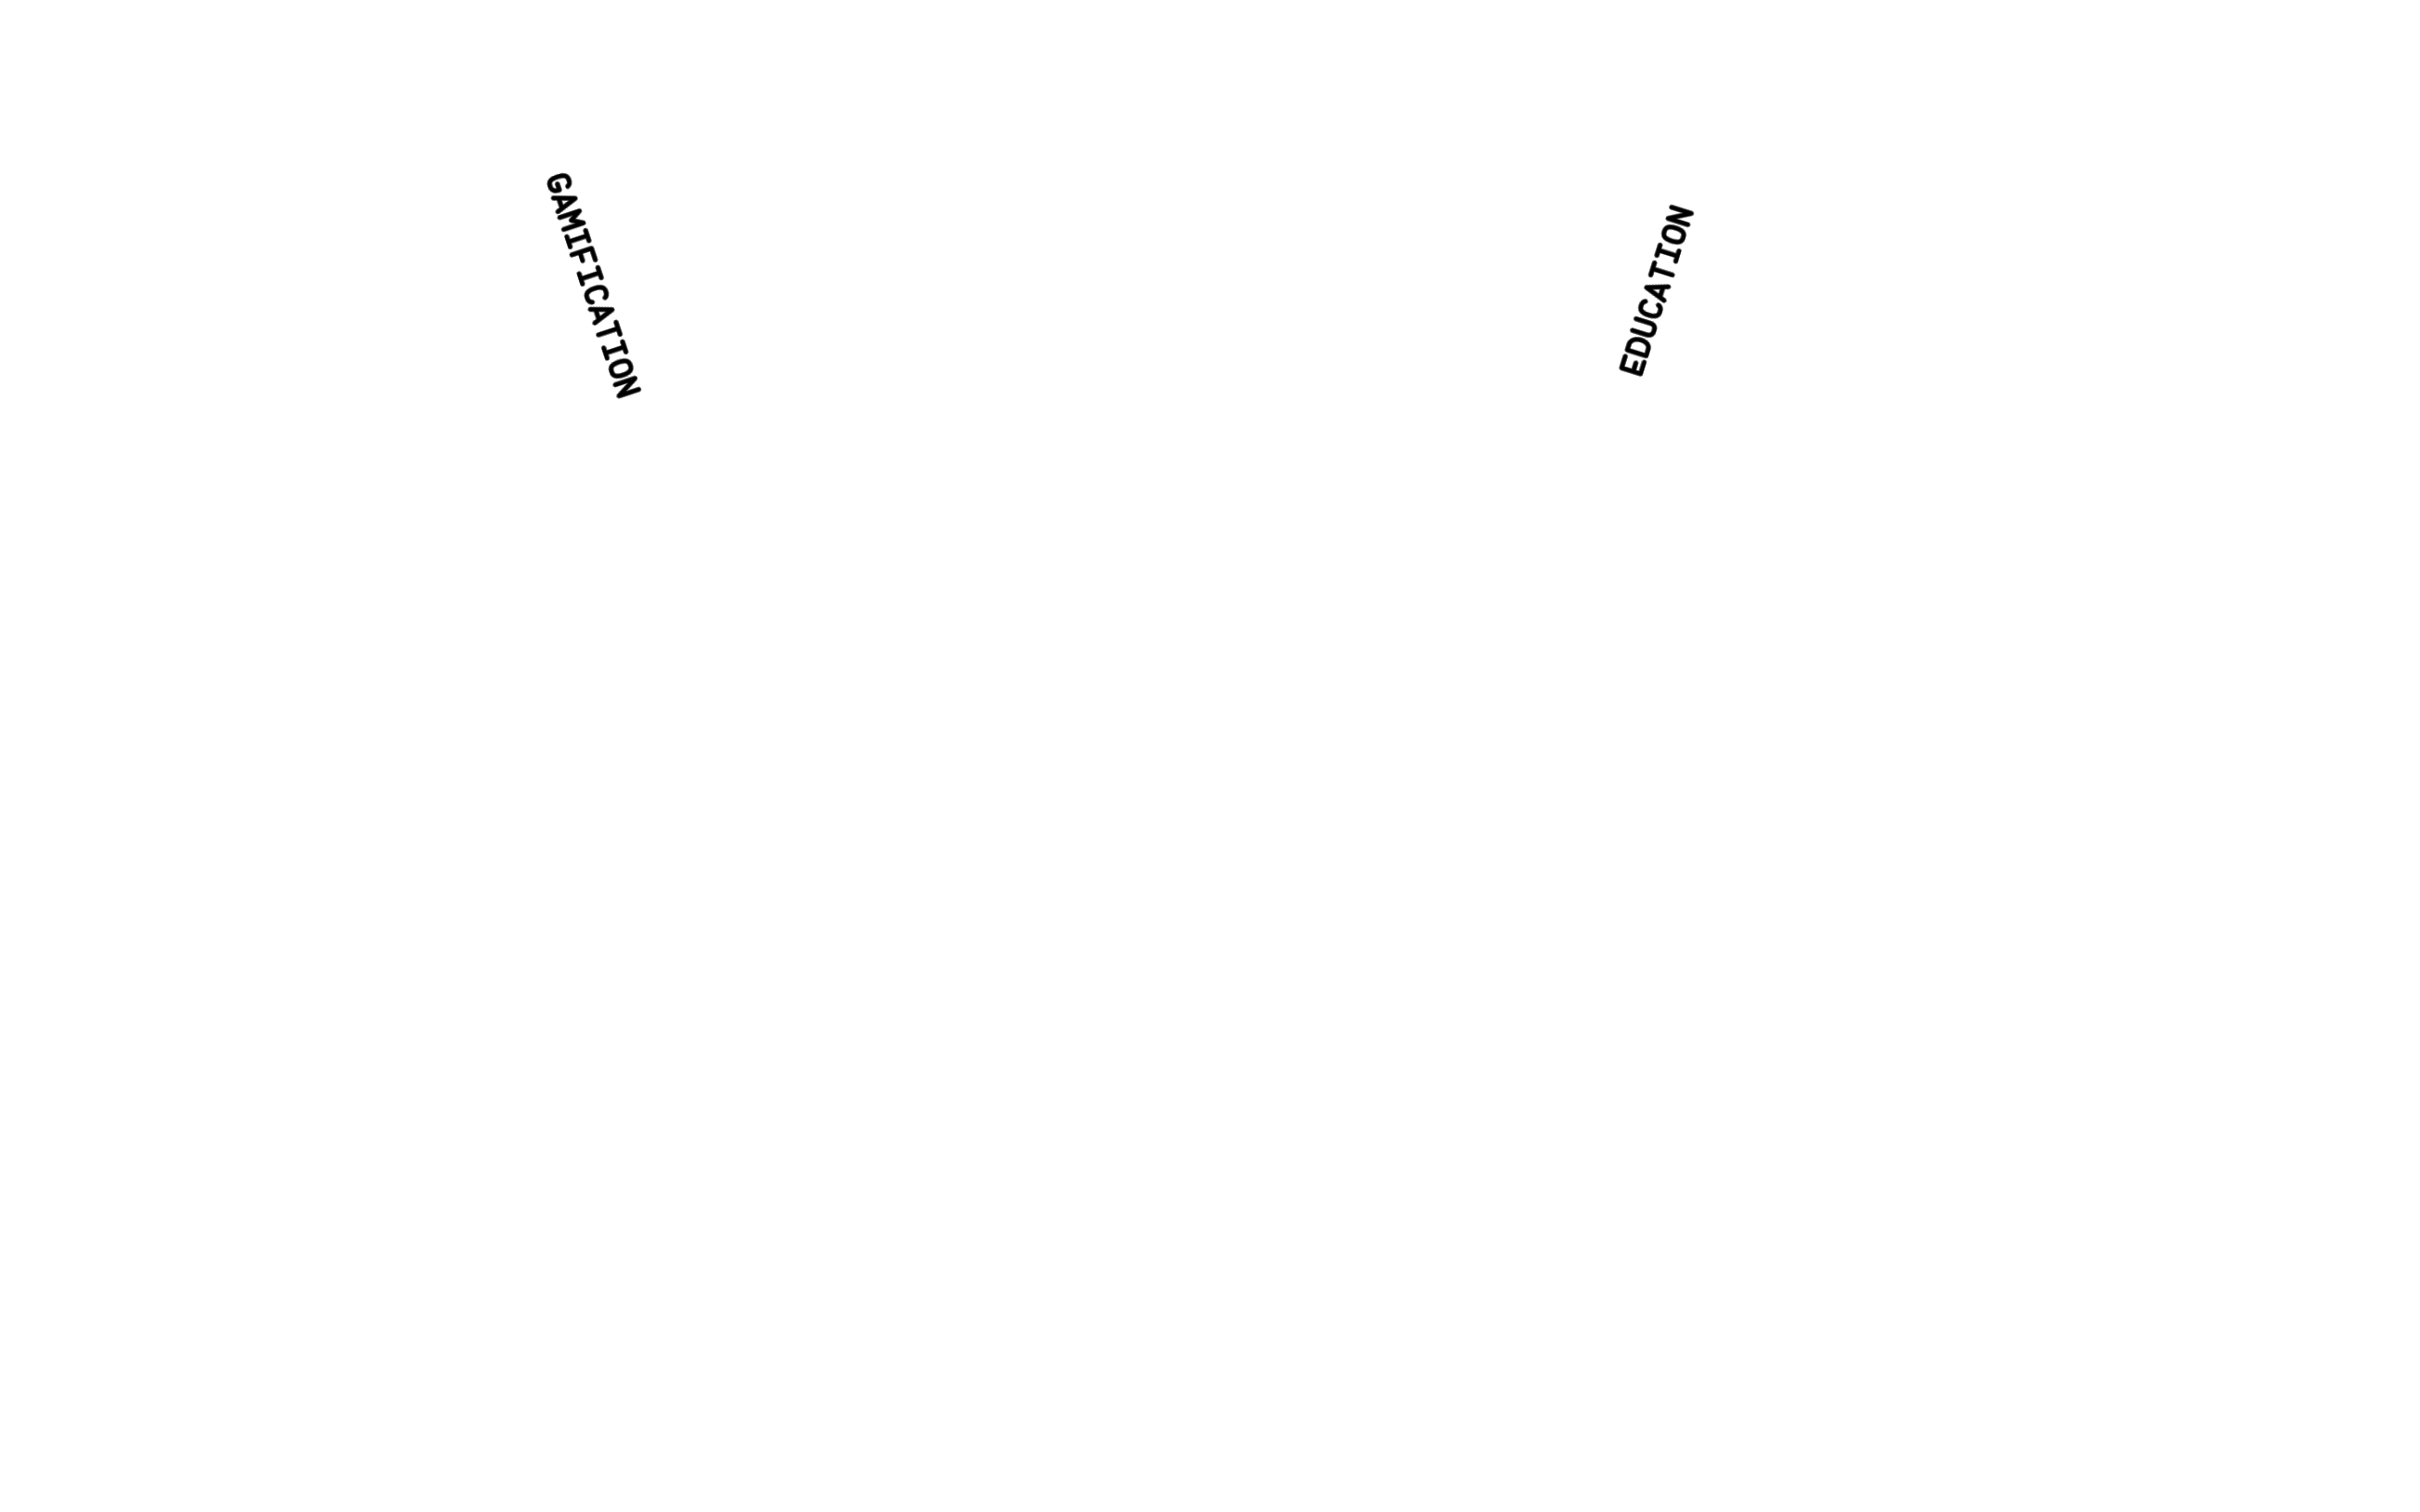 The Contributor Funnel